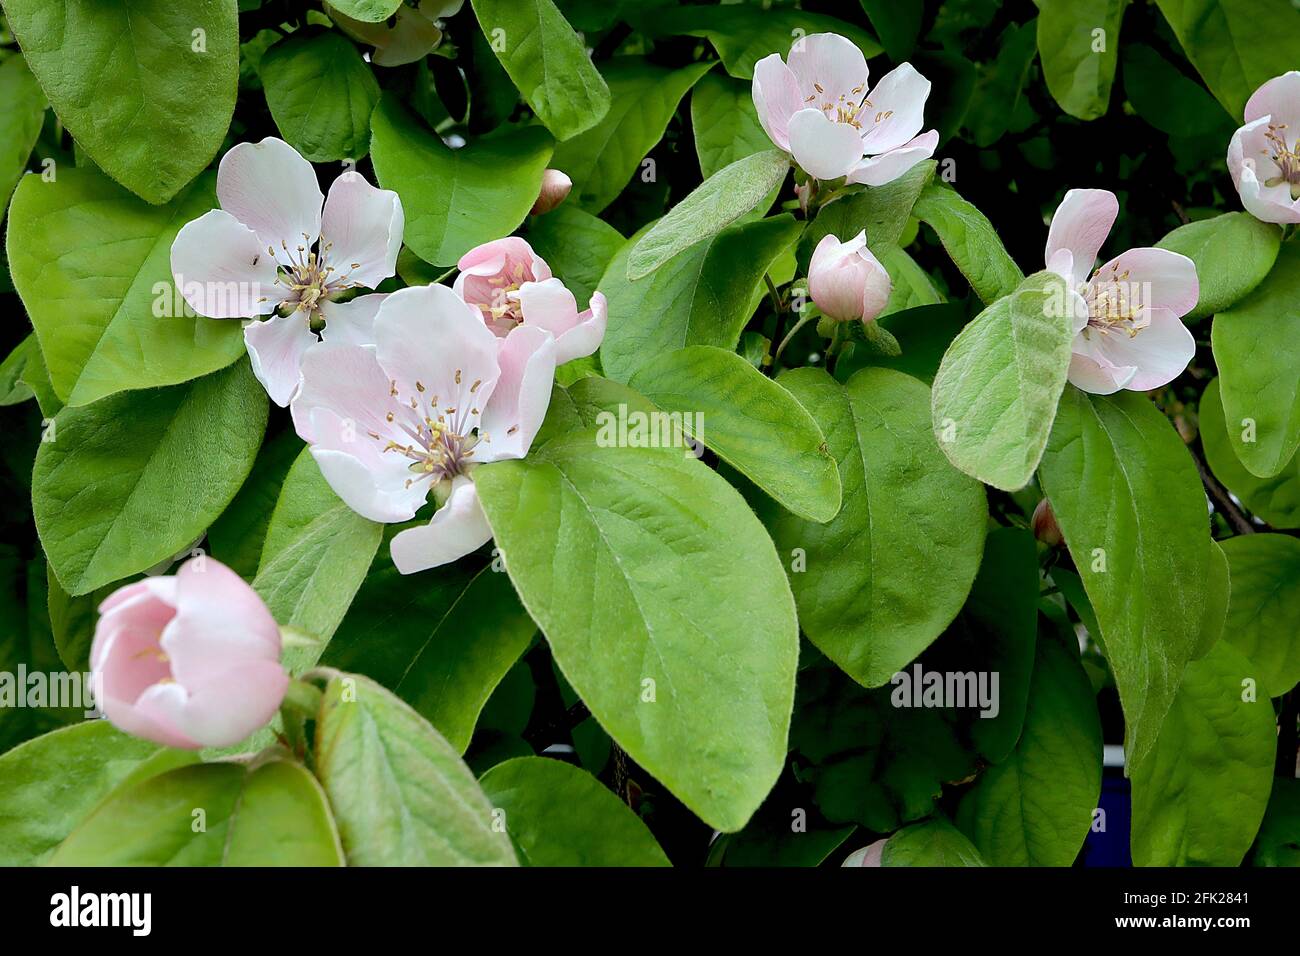 Cydonia oblonga ‘Champion’ Champion quince tree – white cup-shaped flowers with pink veins and large ovate leaves,  April, England, UK Stock Photo